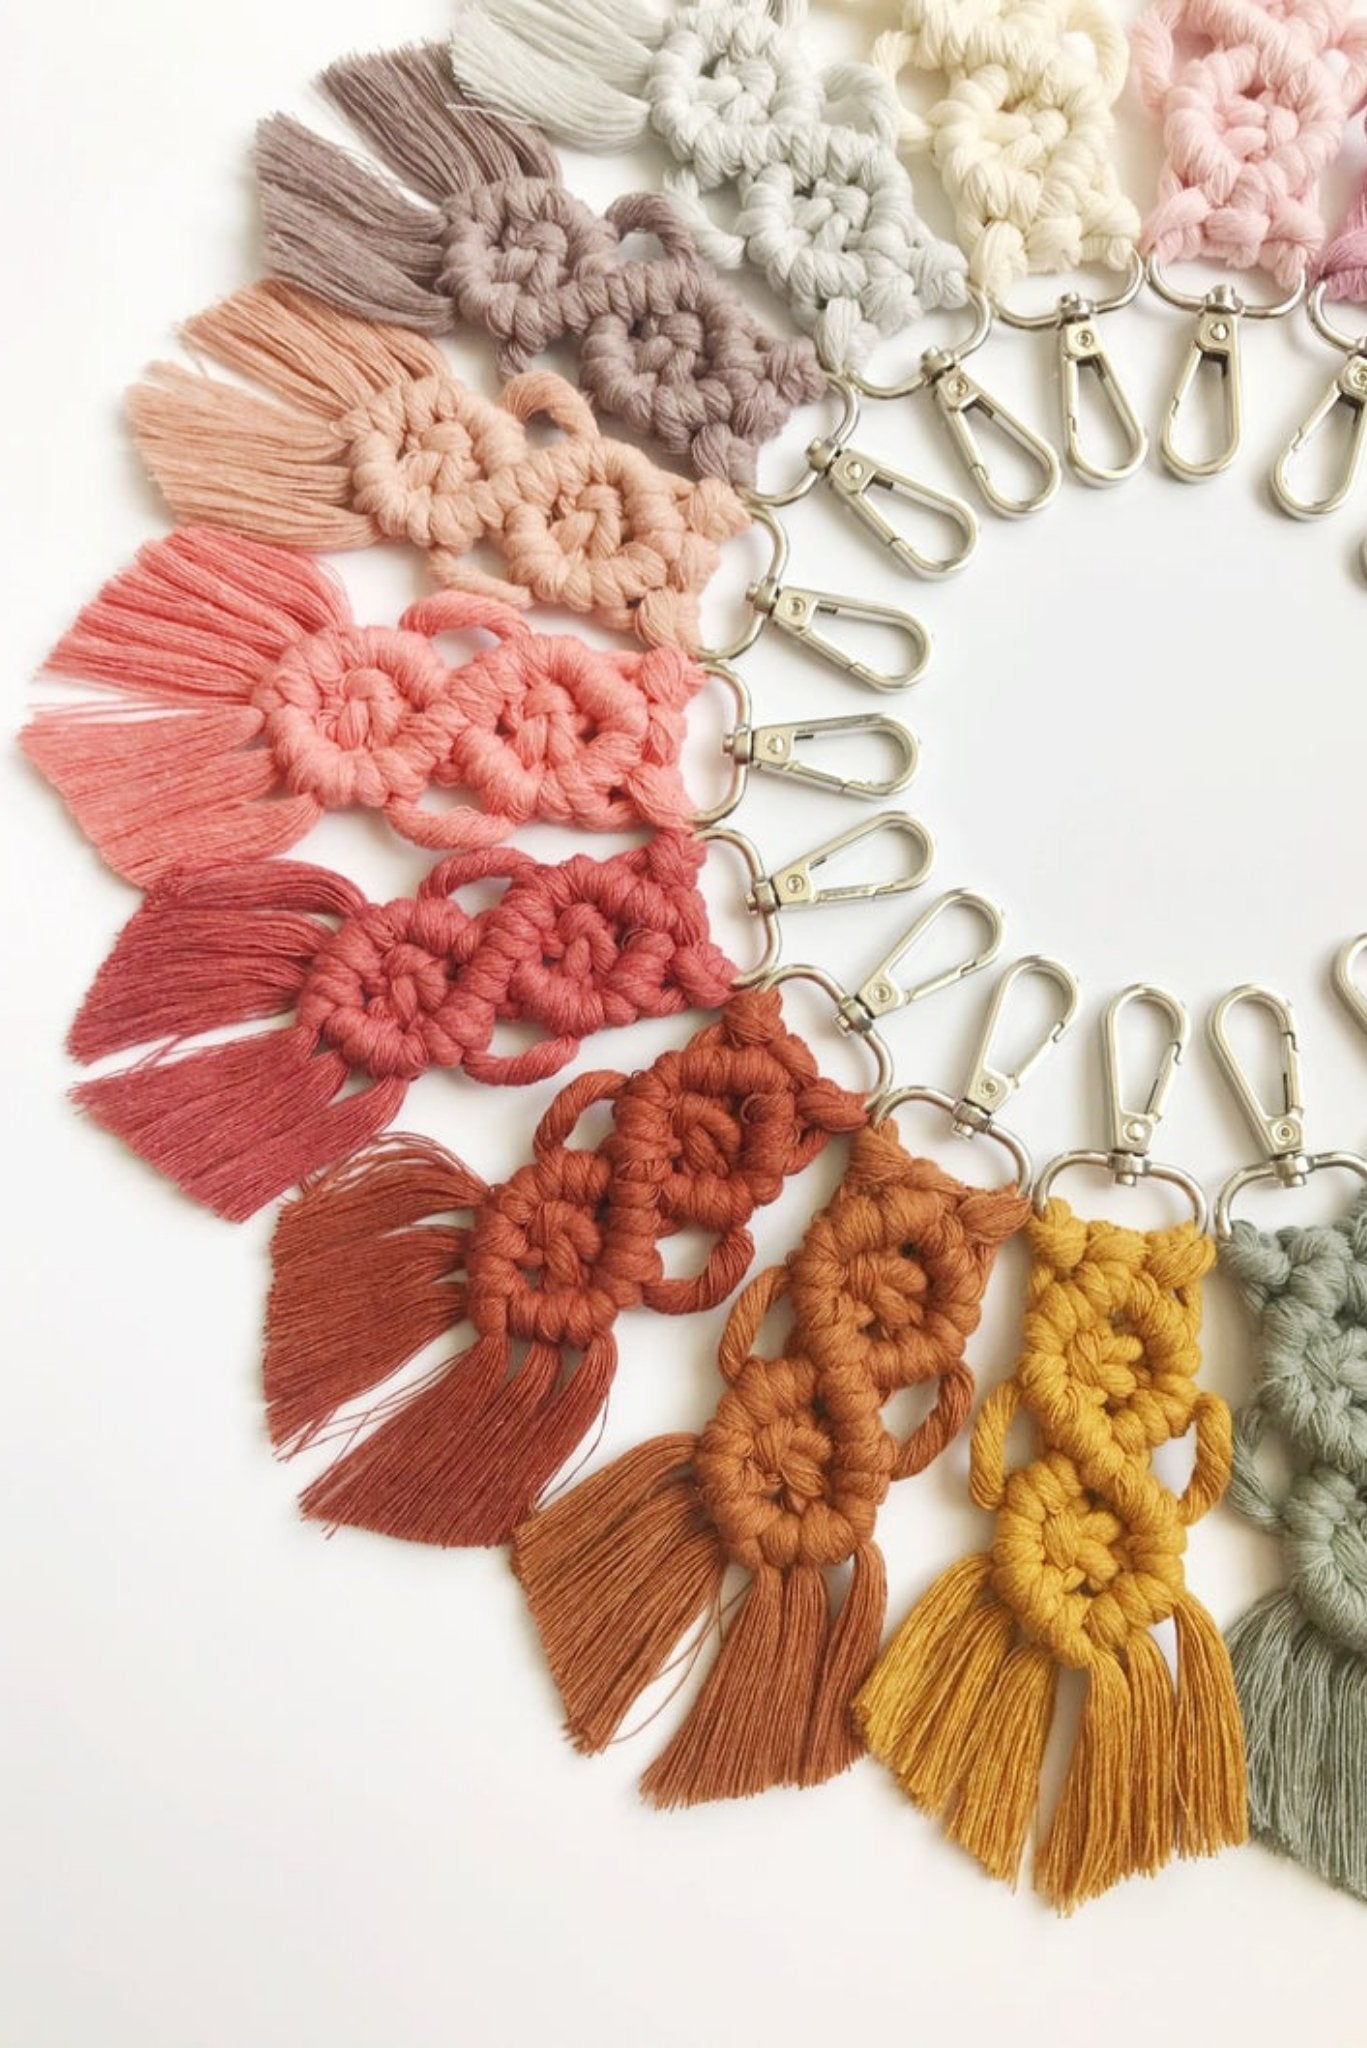 DIY Macrame Keychain! - Pretty Collected